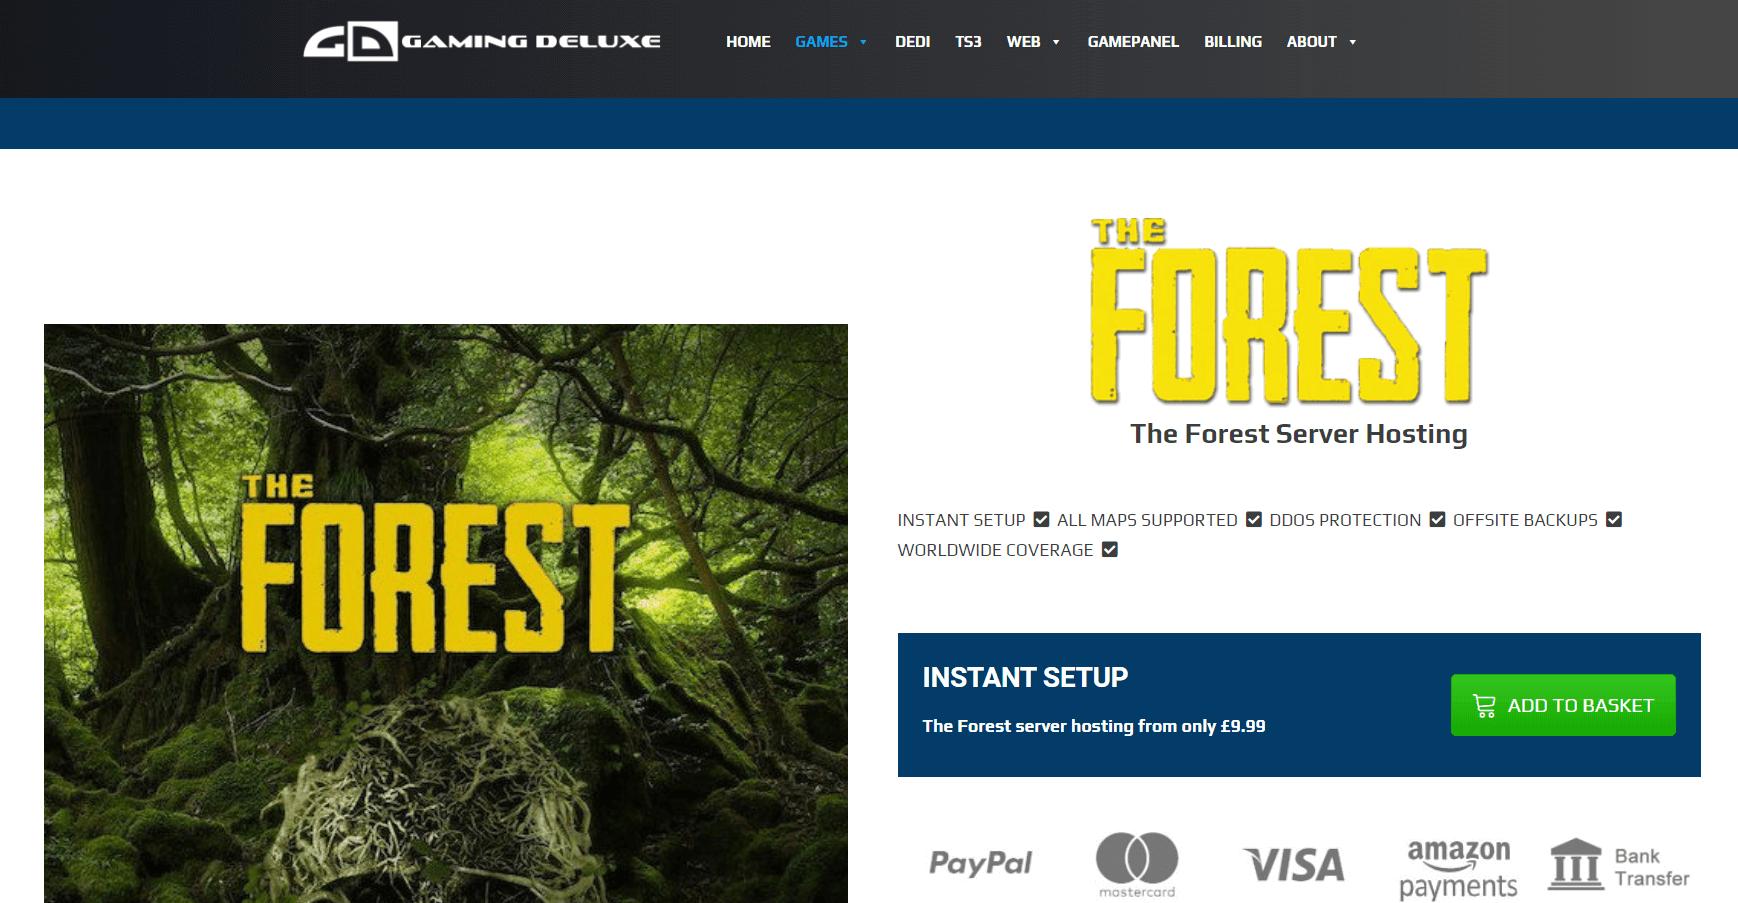 Hosting a dedicated The Forest server via Gamingdeluxe